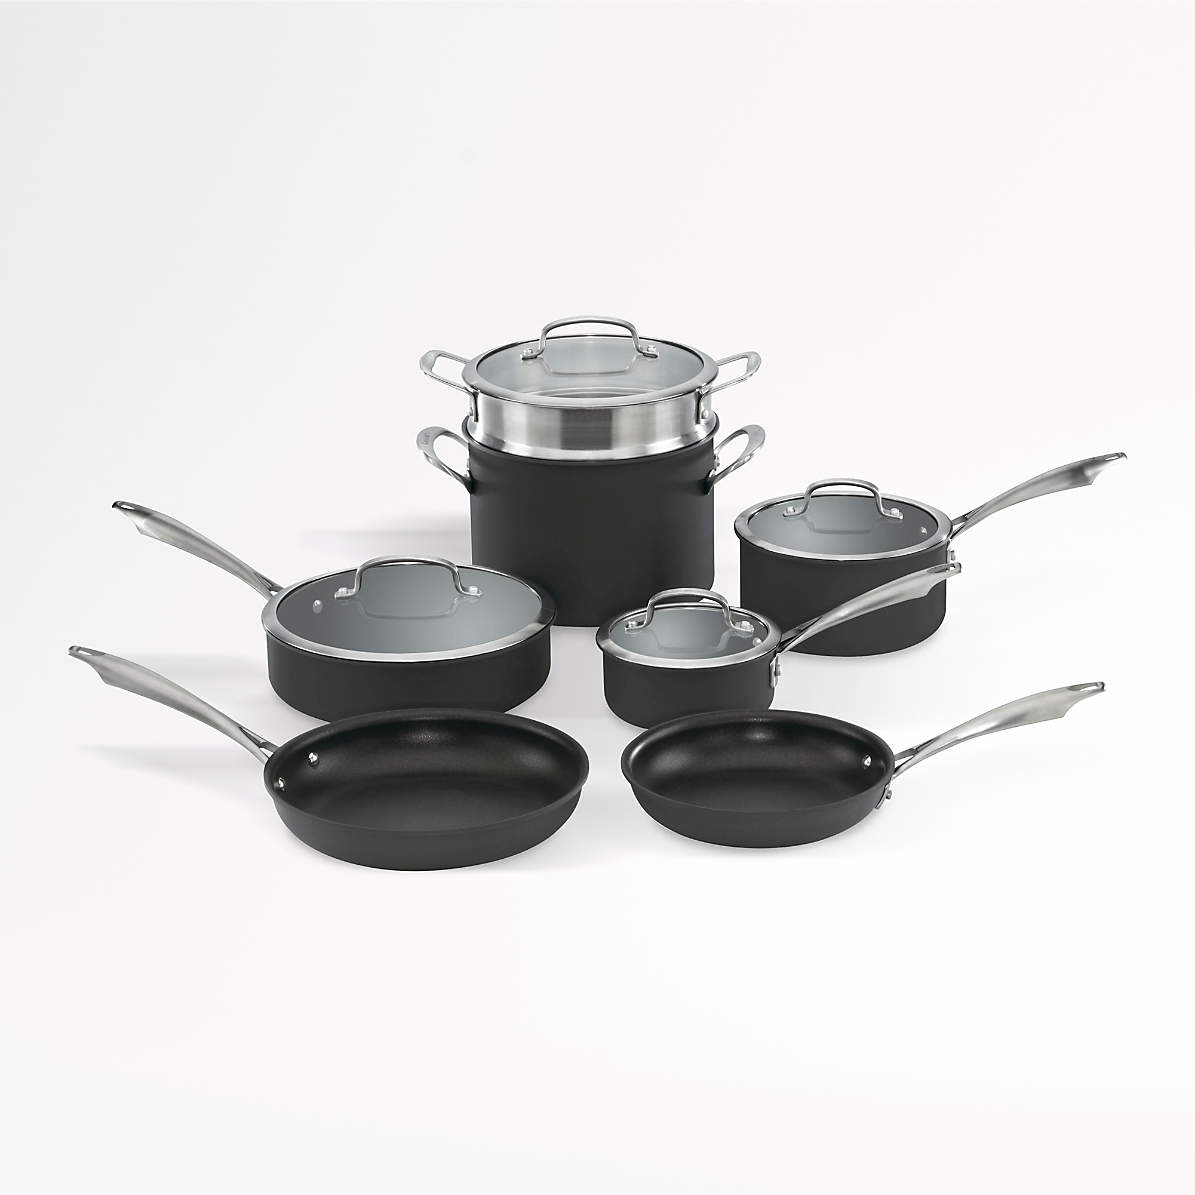 Cuisinart® Dishwasher-Anodized Saucepan for Extended-Stay Hotel Guests